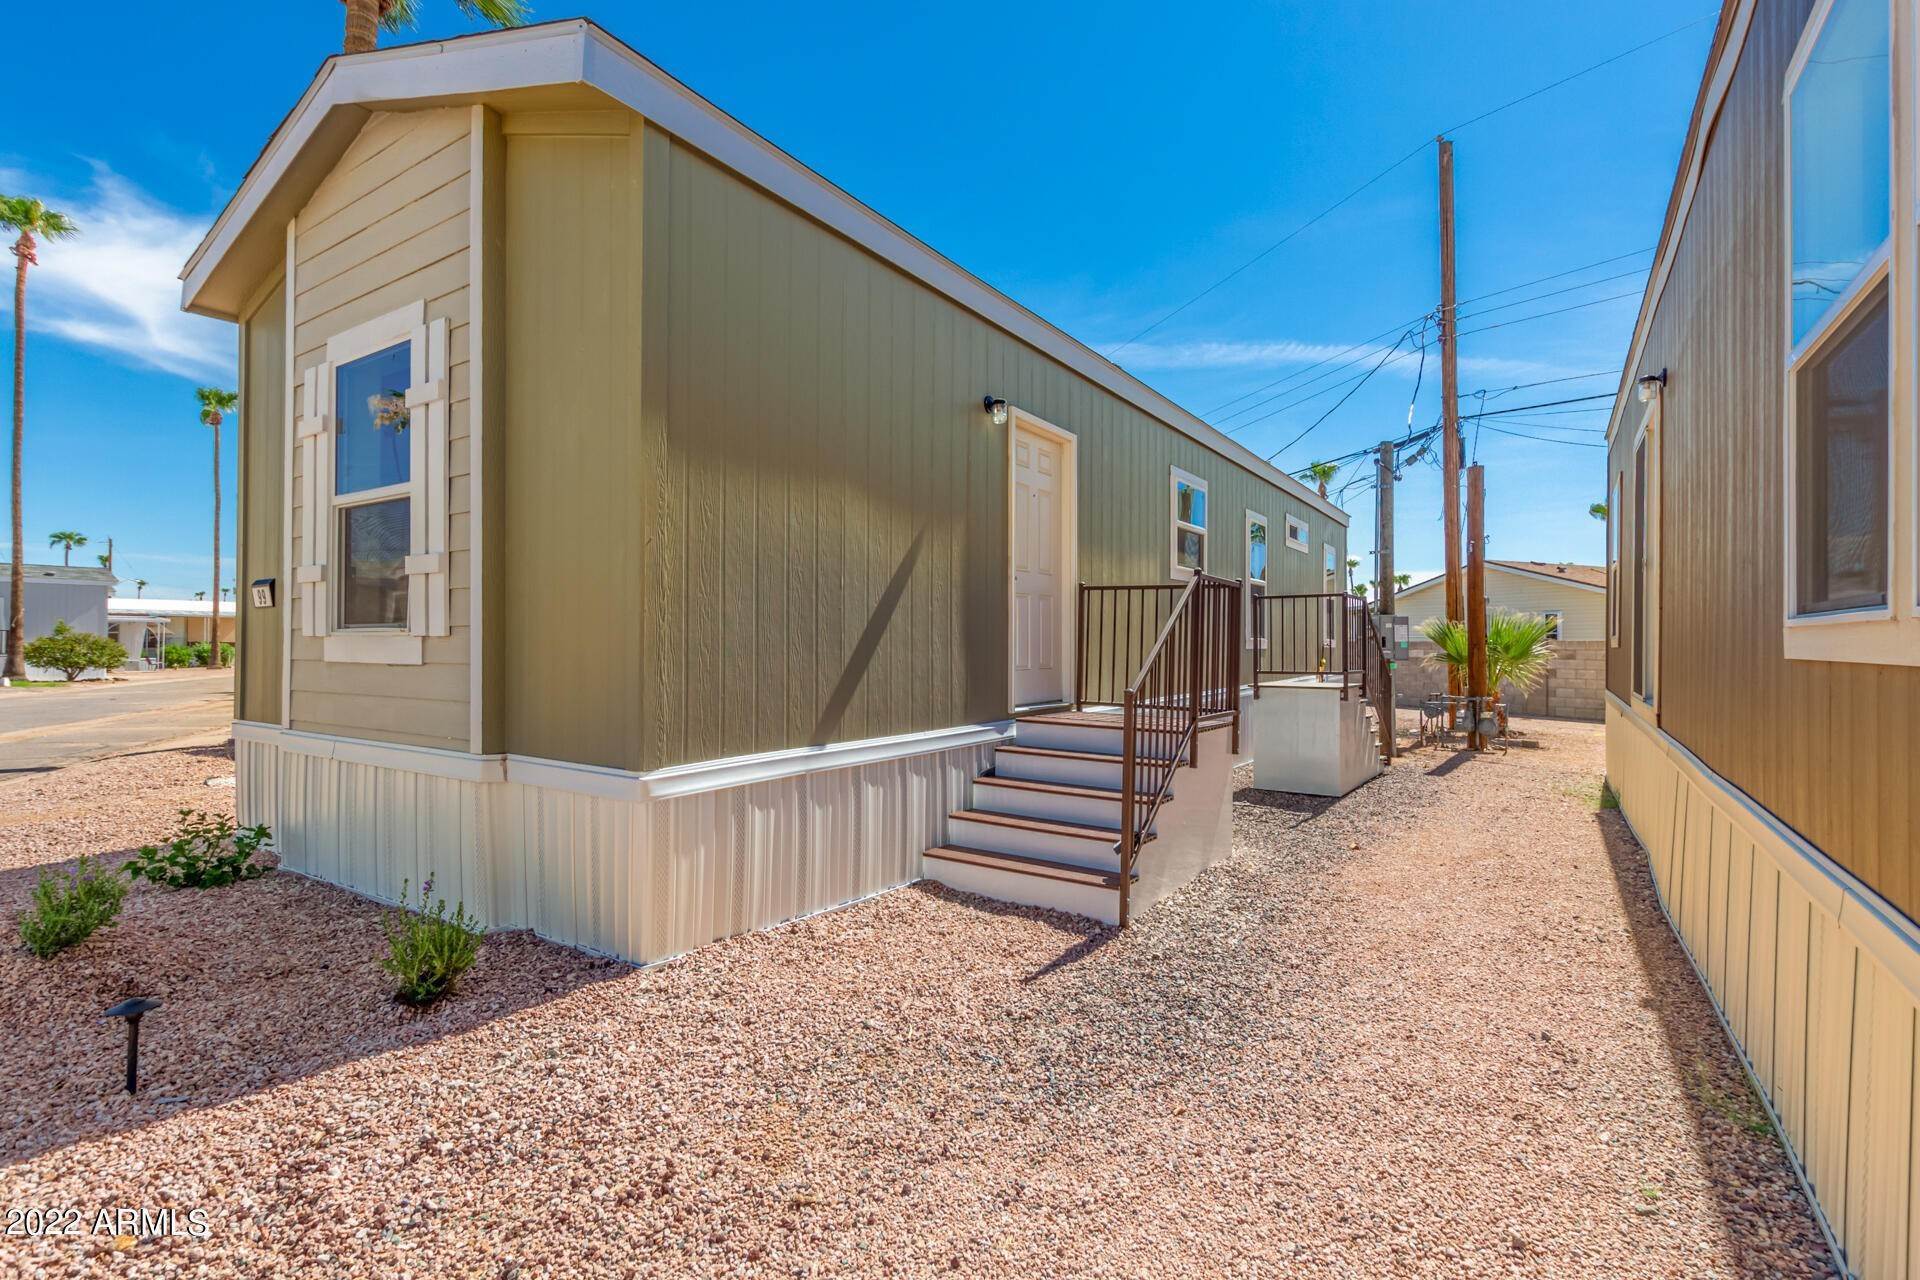 16. Manufactured Home for Sale at Mesa, AZ 85207